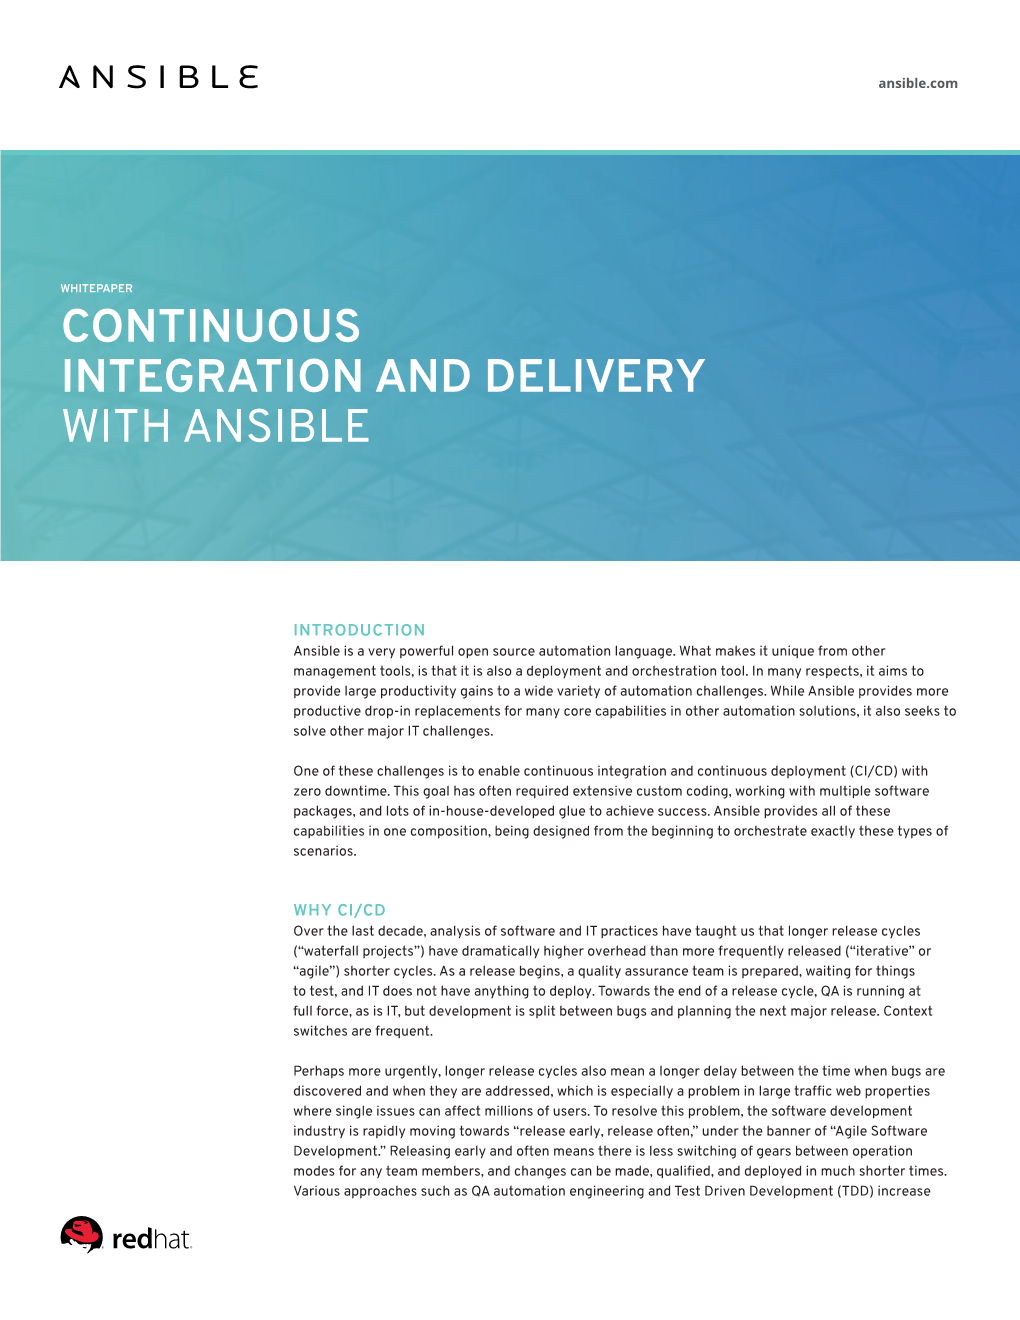 Continuous Integration and Delivery with Ansible